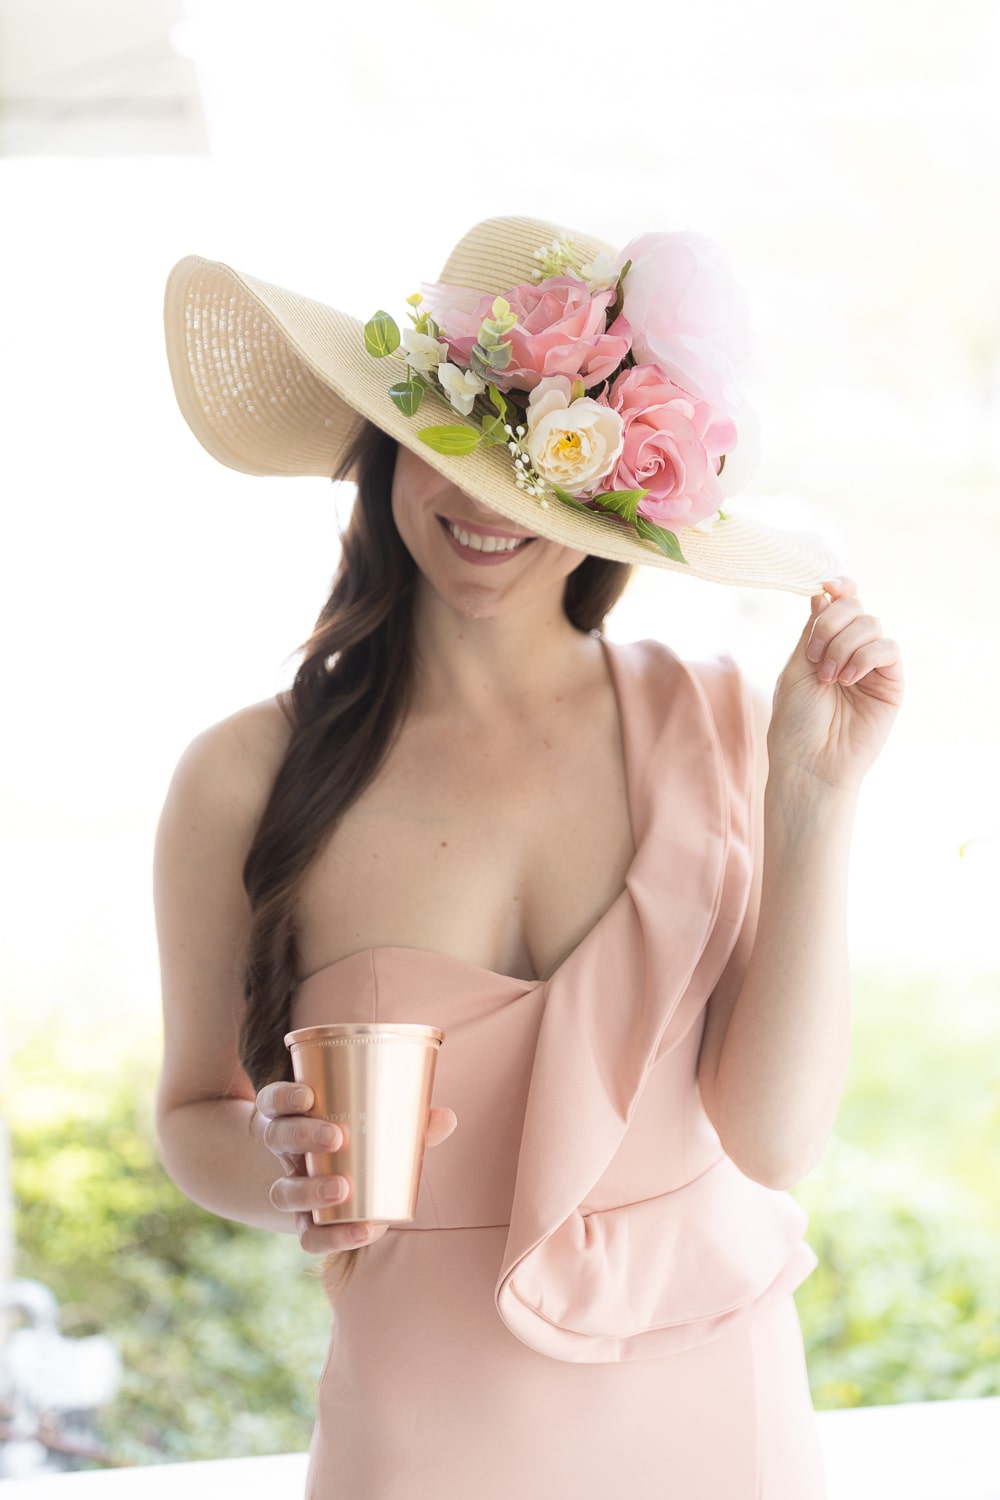 DIY Kentucky Derby hat tutorial by southern blogger Stephanie Ziajka on Diary of a Debutante